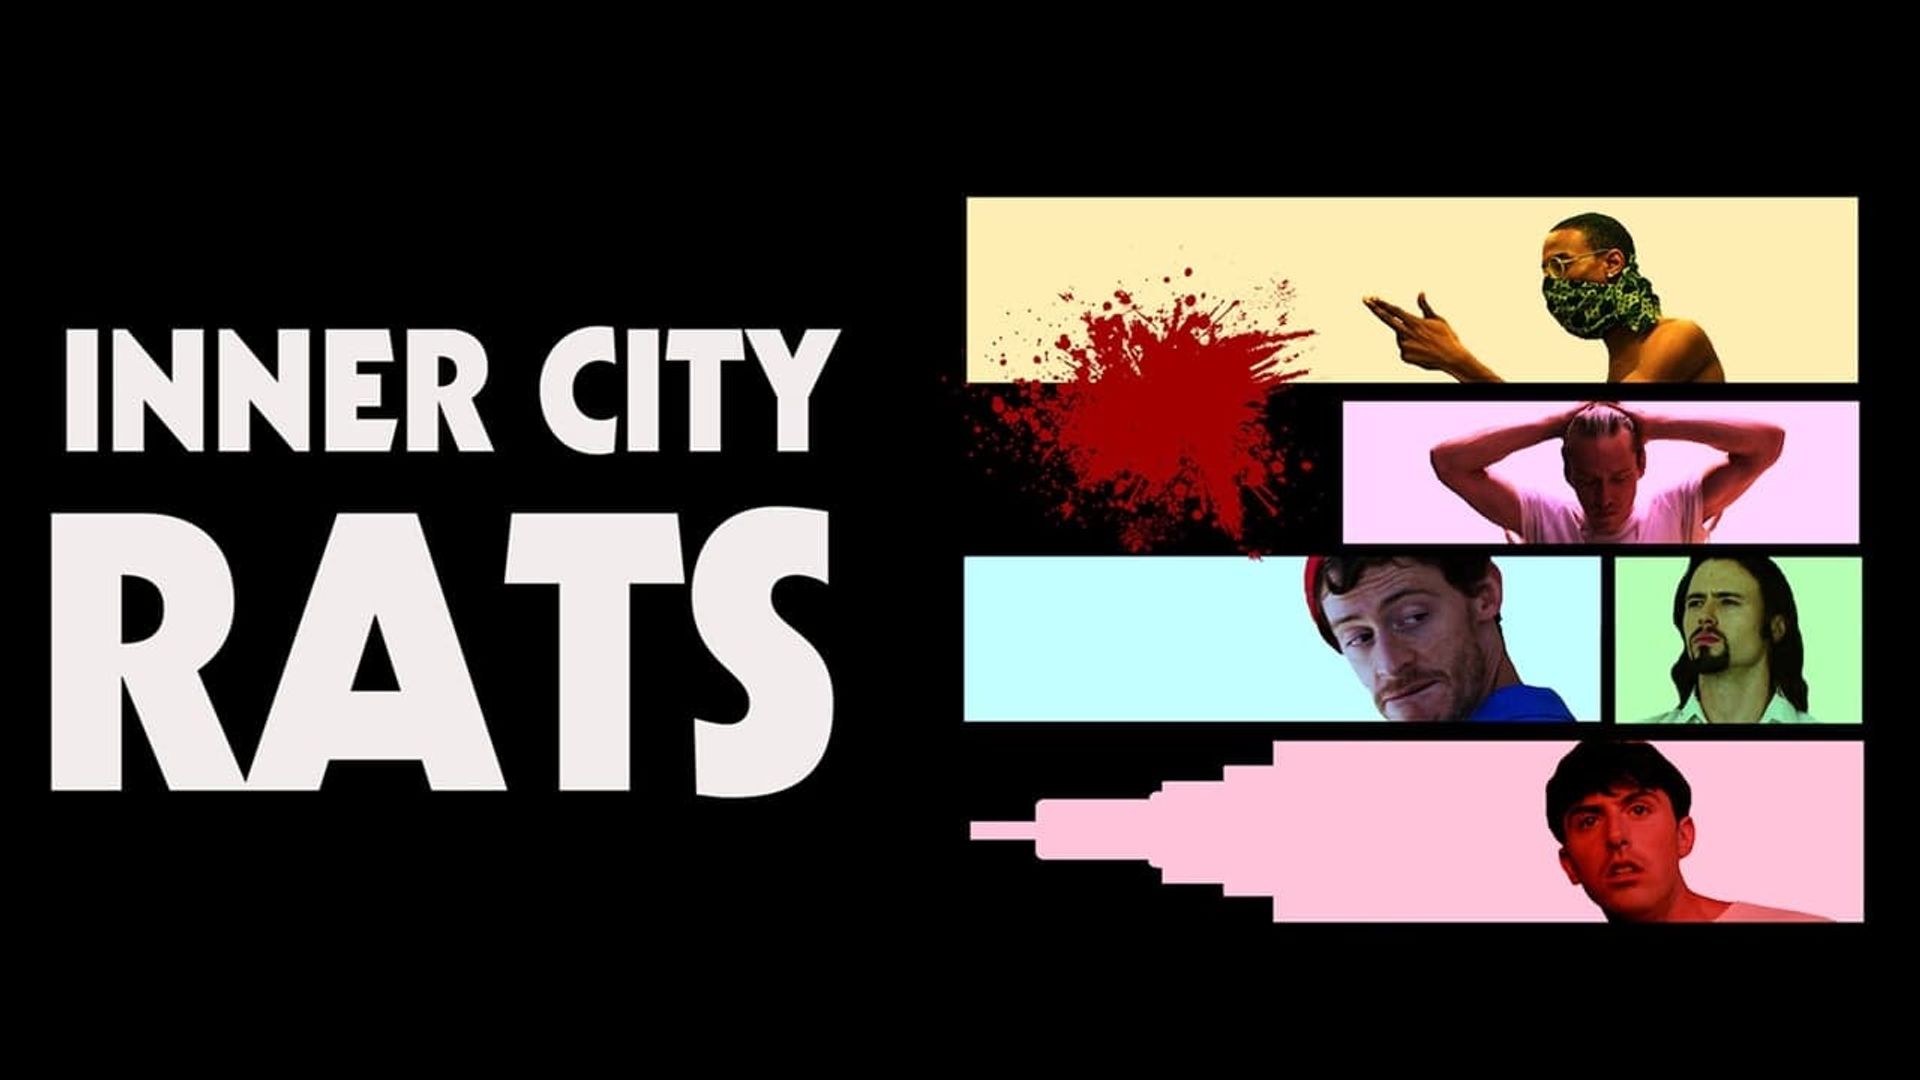 Inner City Rats background